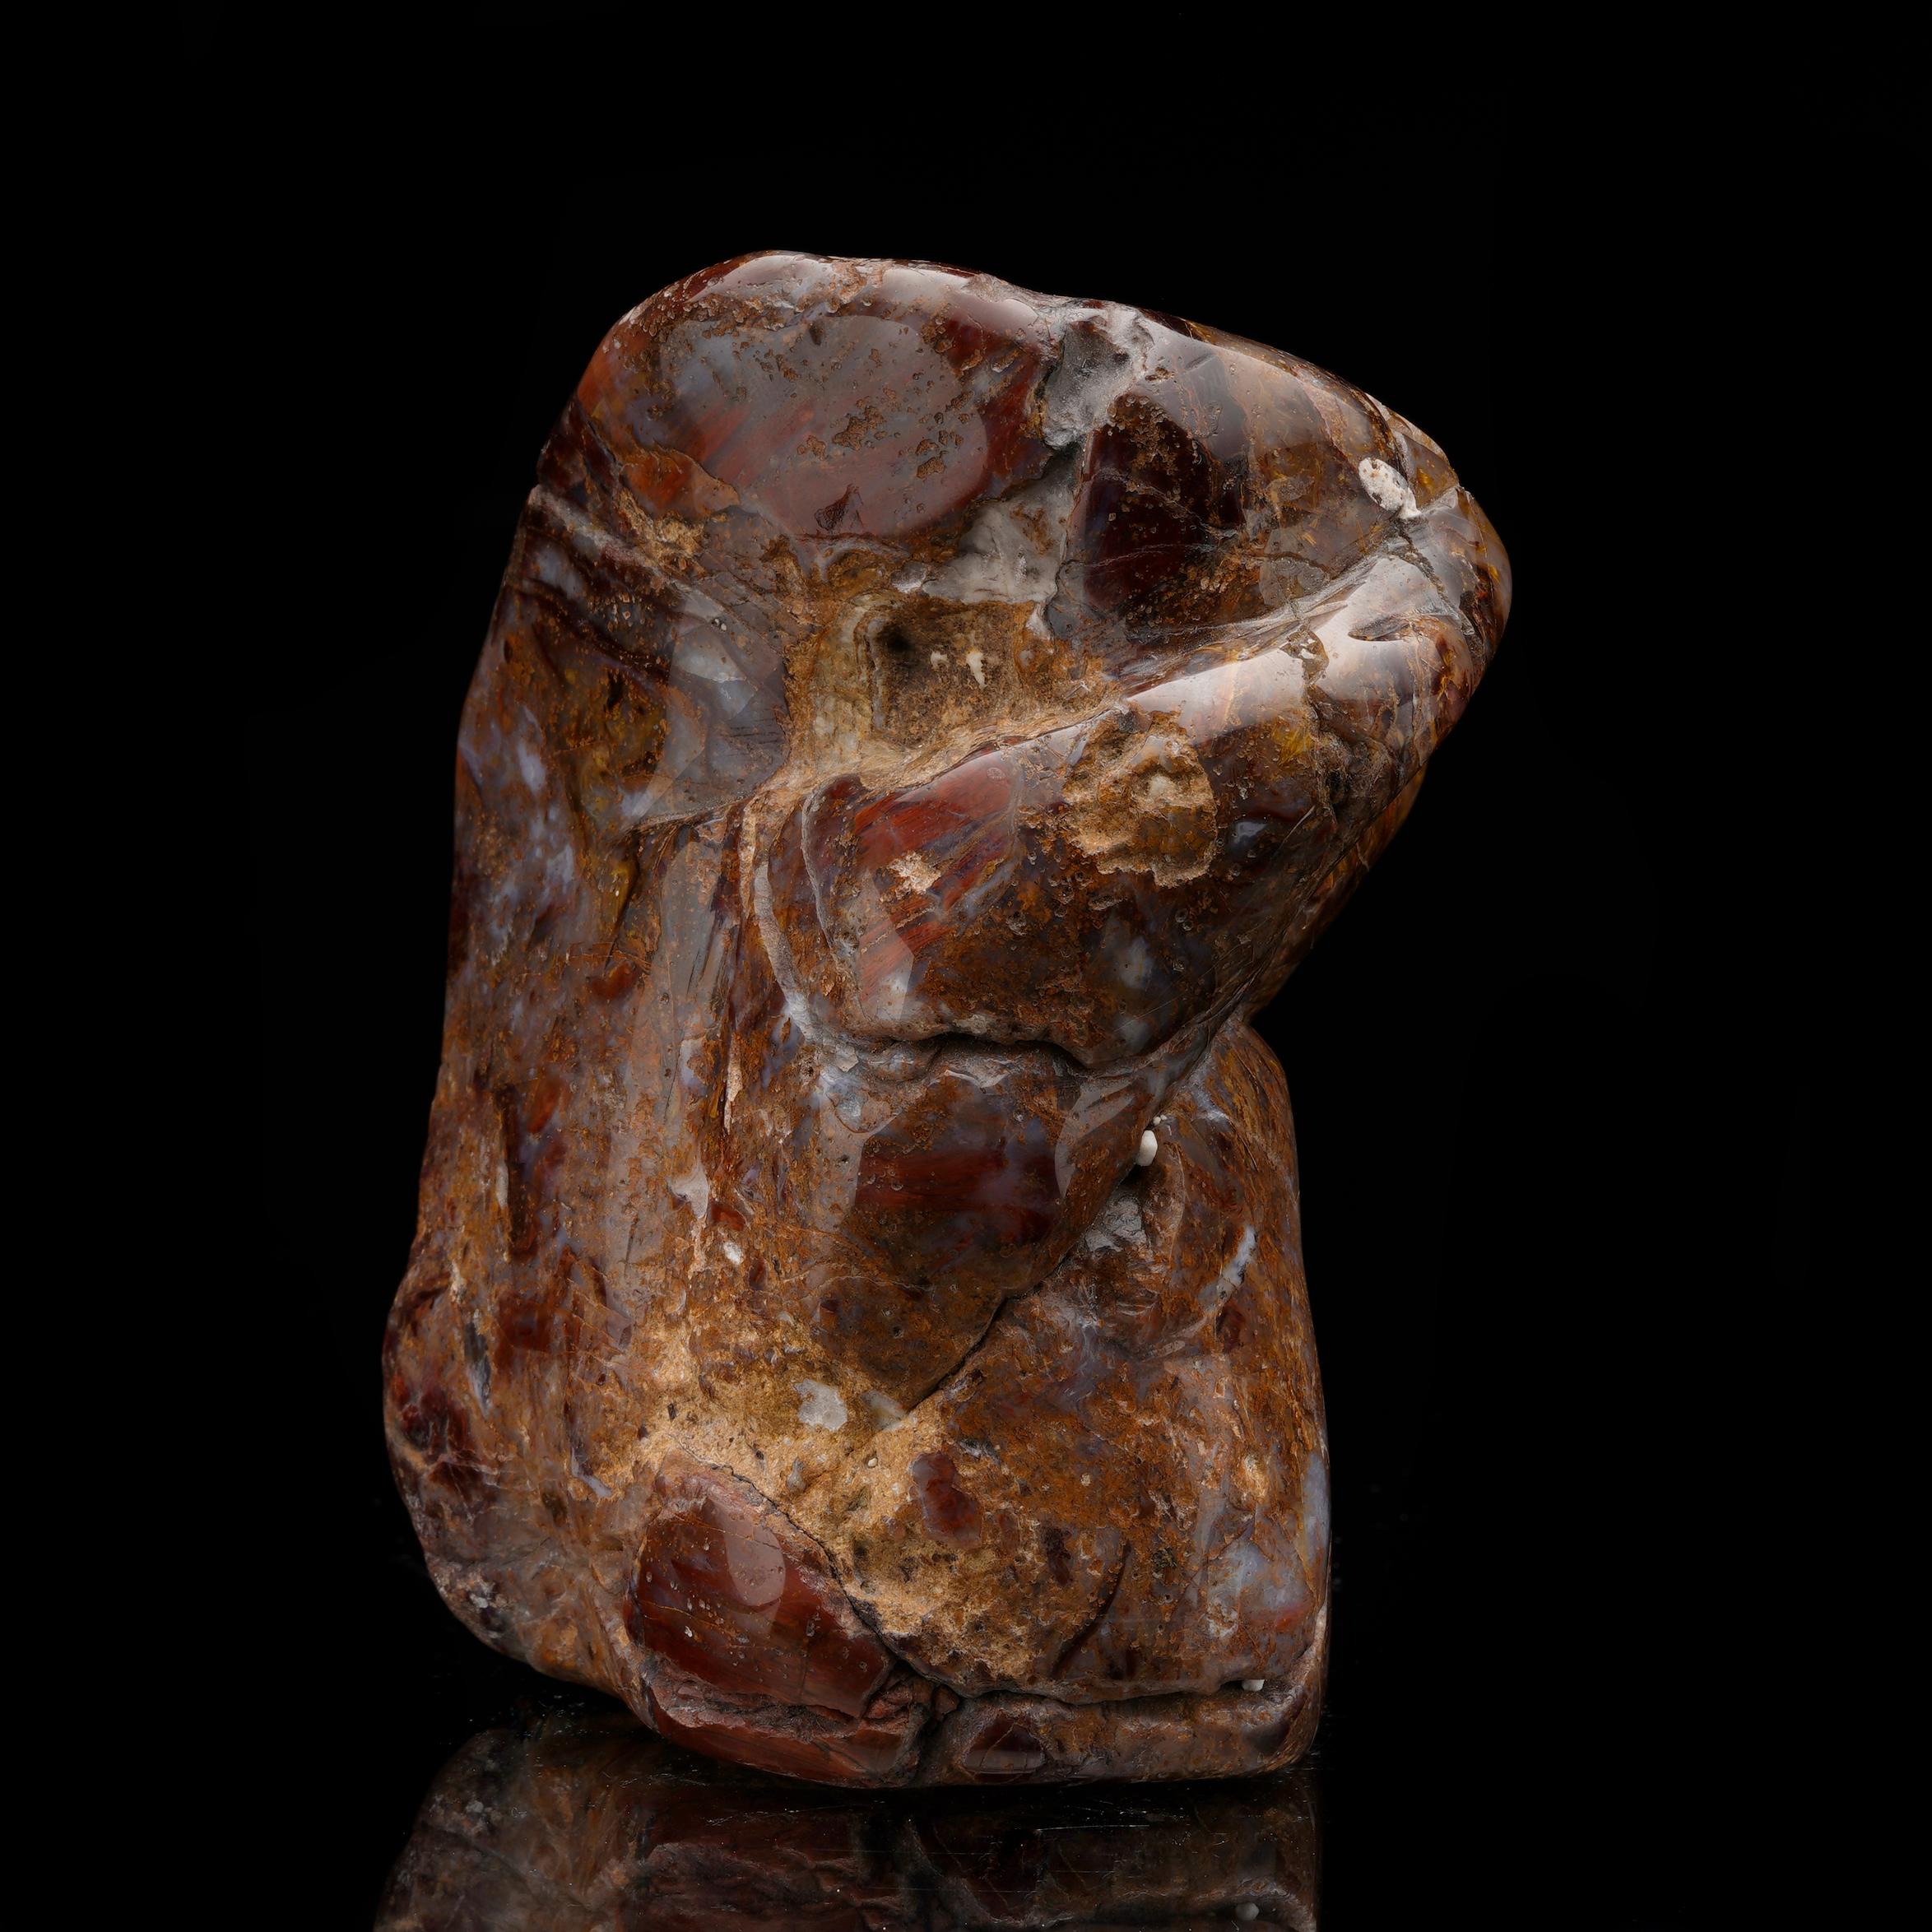 Pietersite is prized for its incredible chatoyancy and this specimen makes no exception. Hand-polished out of one solid piece of the rare mineral from a single location in Namibia, this flowing freeform streaked with lush reds, browns, and caramels